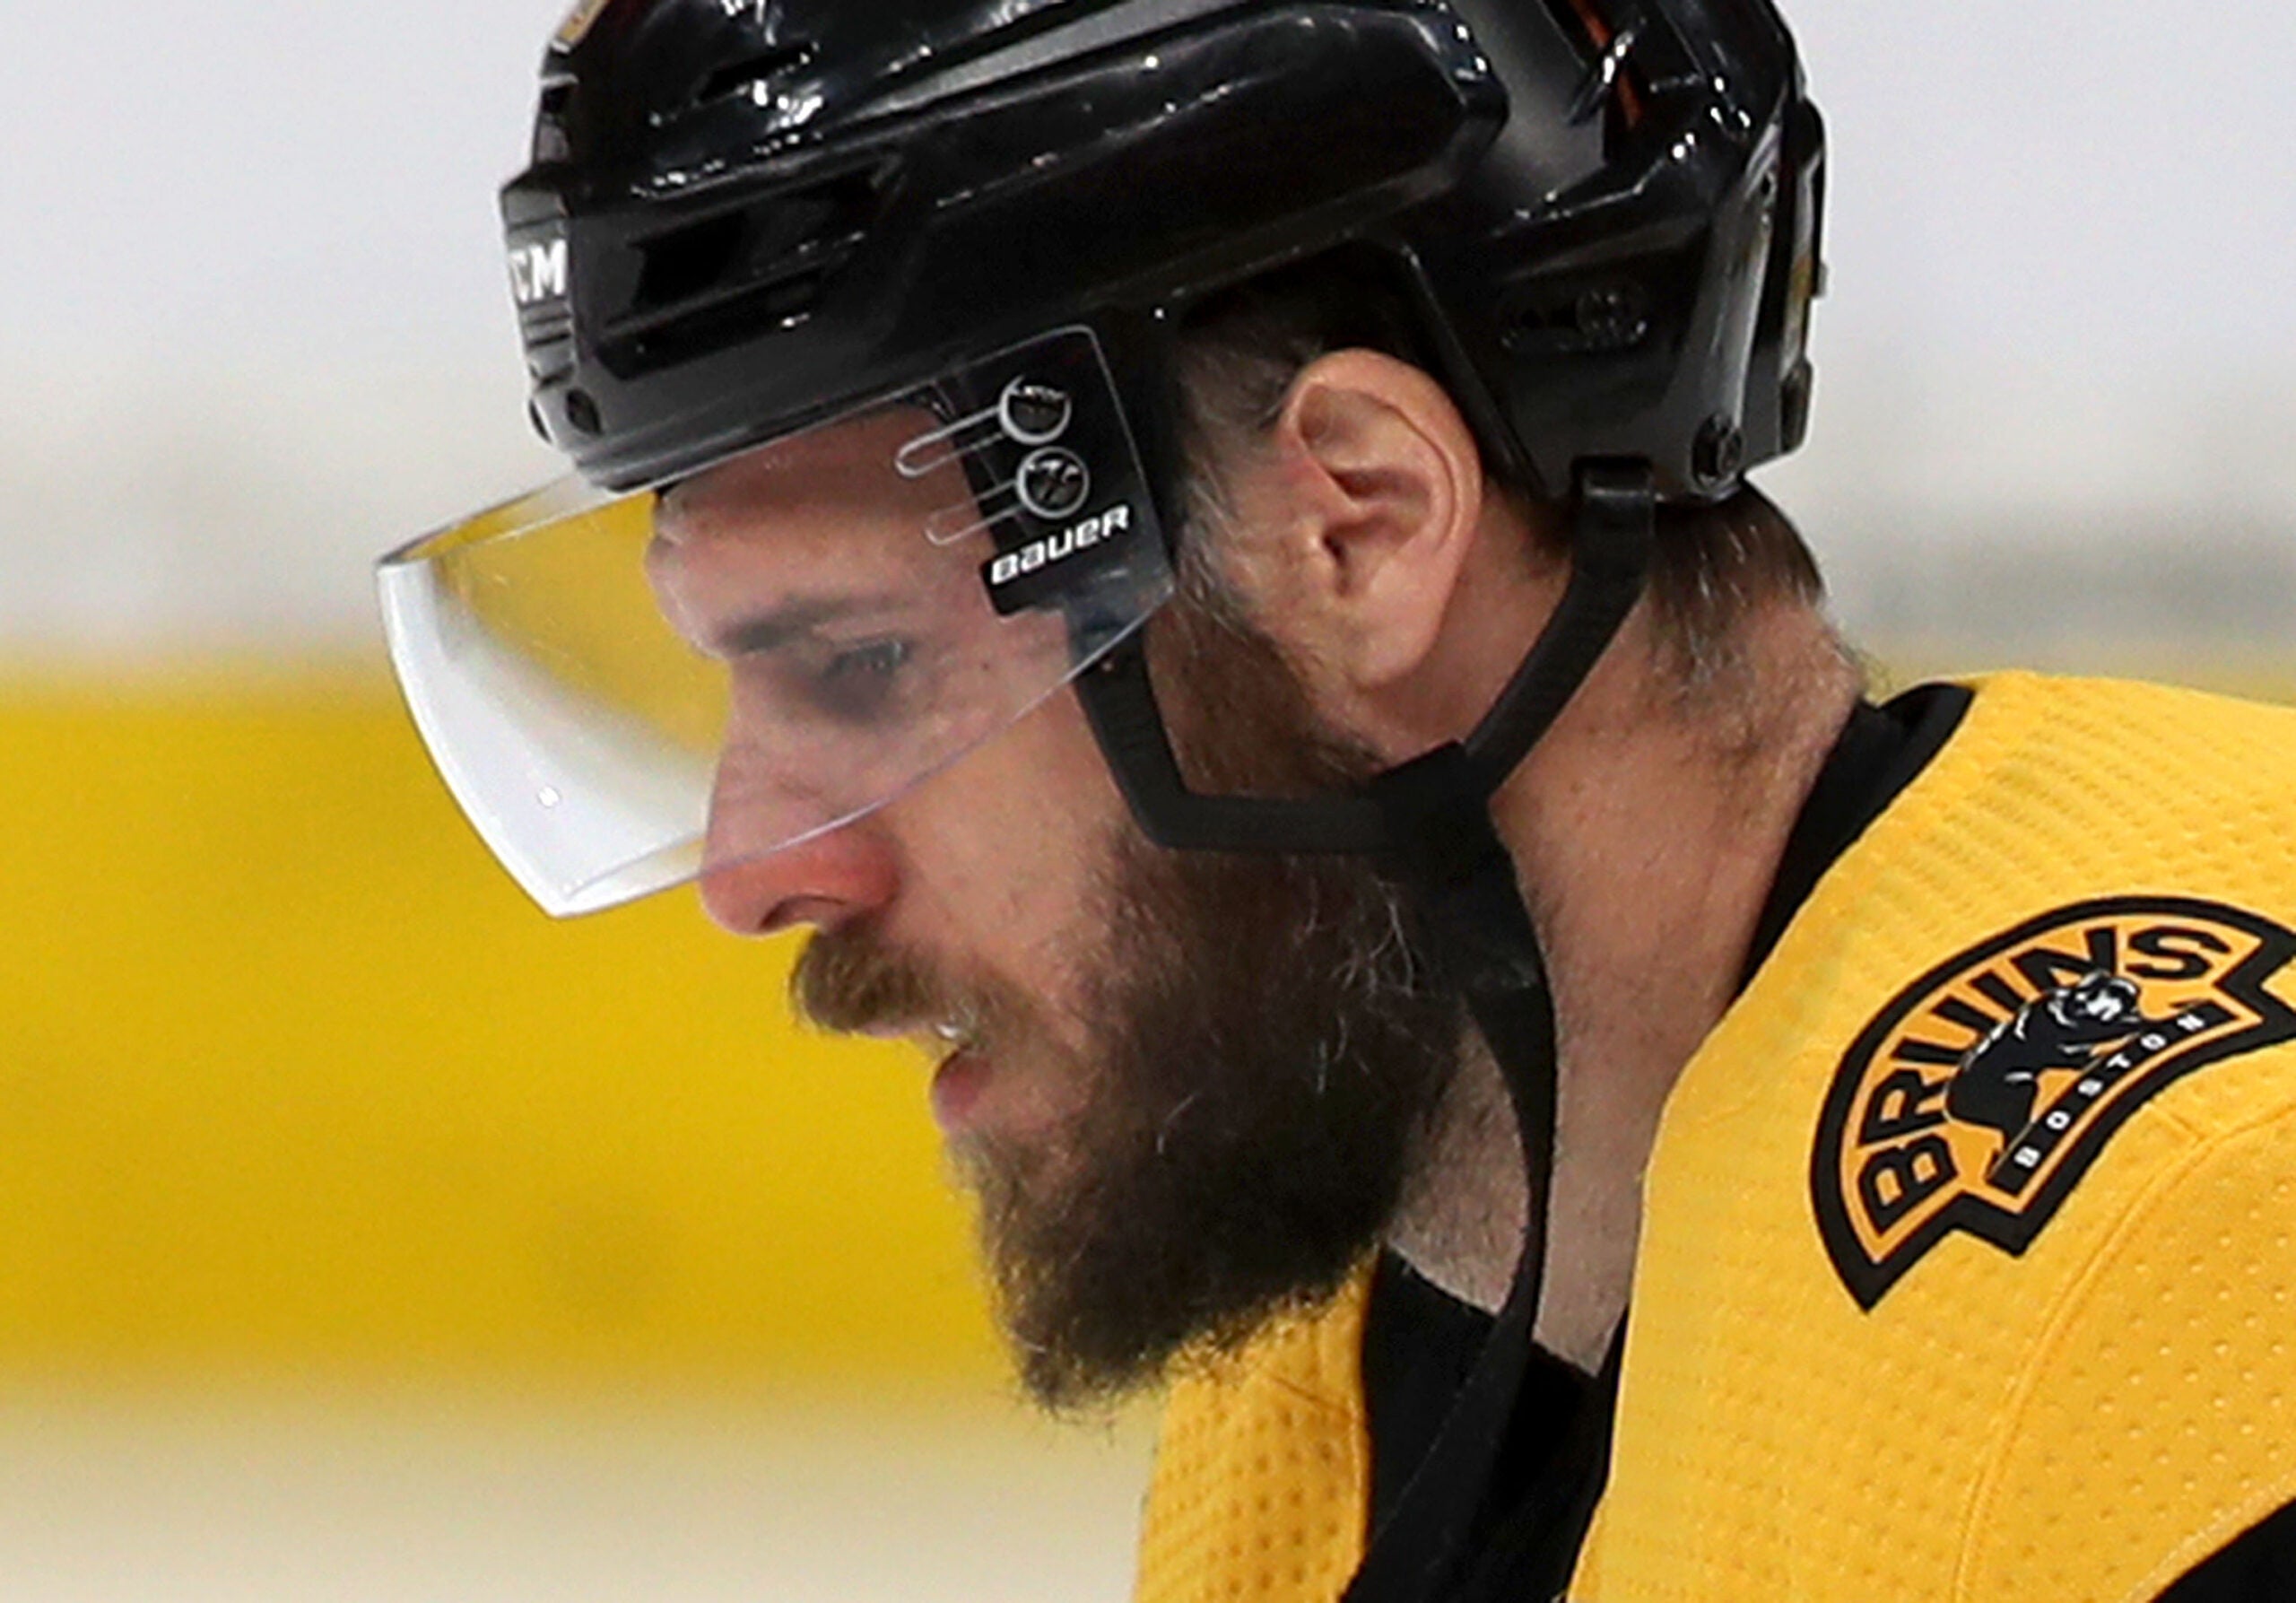 Breaking Down The Best Playoff Beards Remaining In The Stanley Cup Final